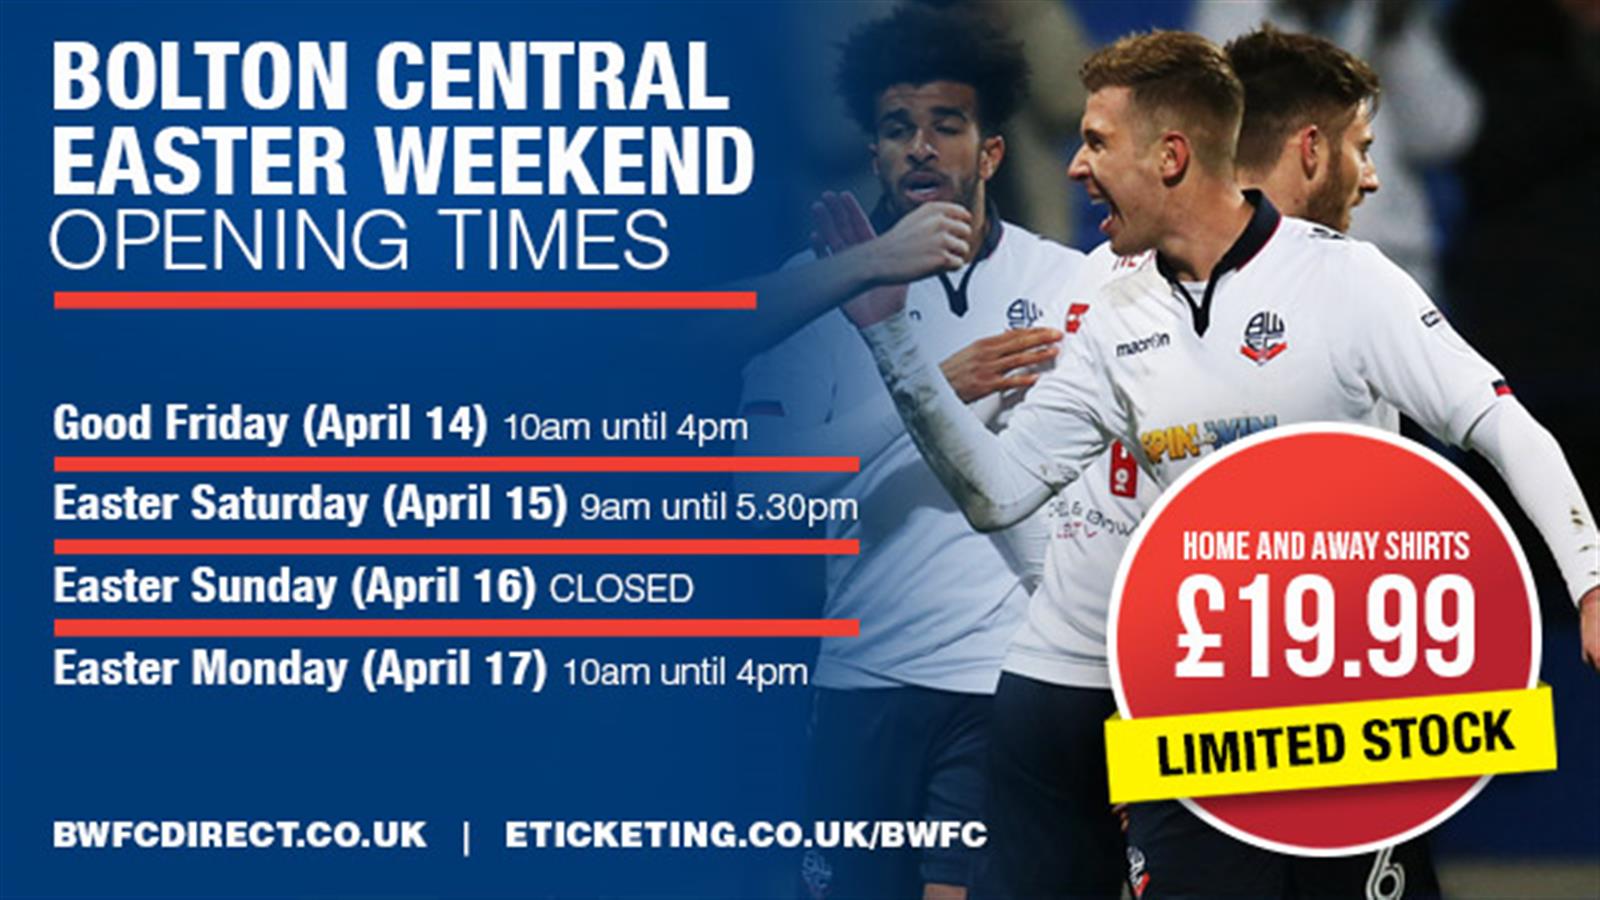 Bolton Central Easter weekend opening times confirmed